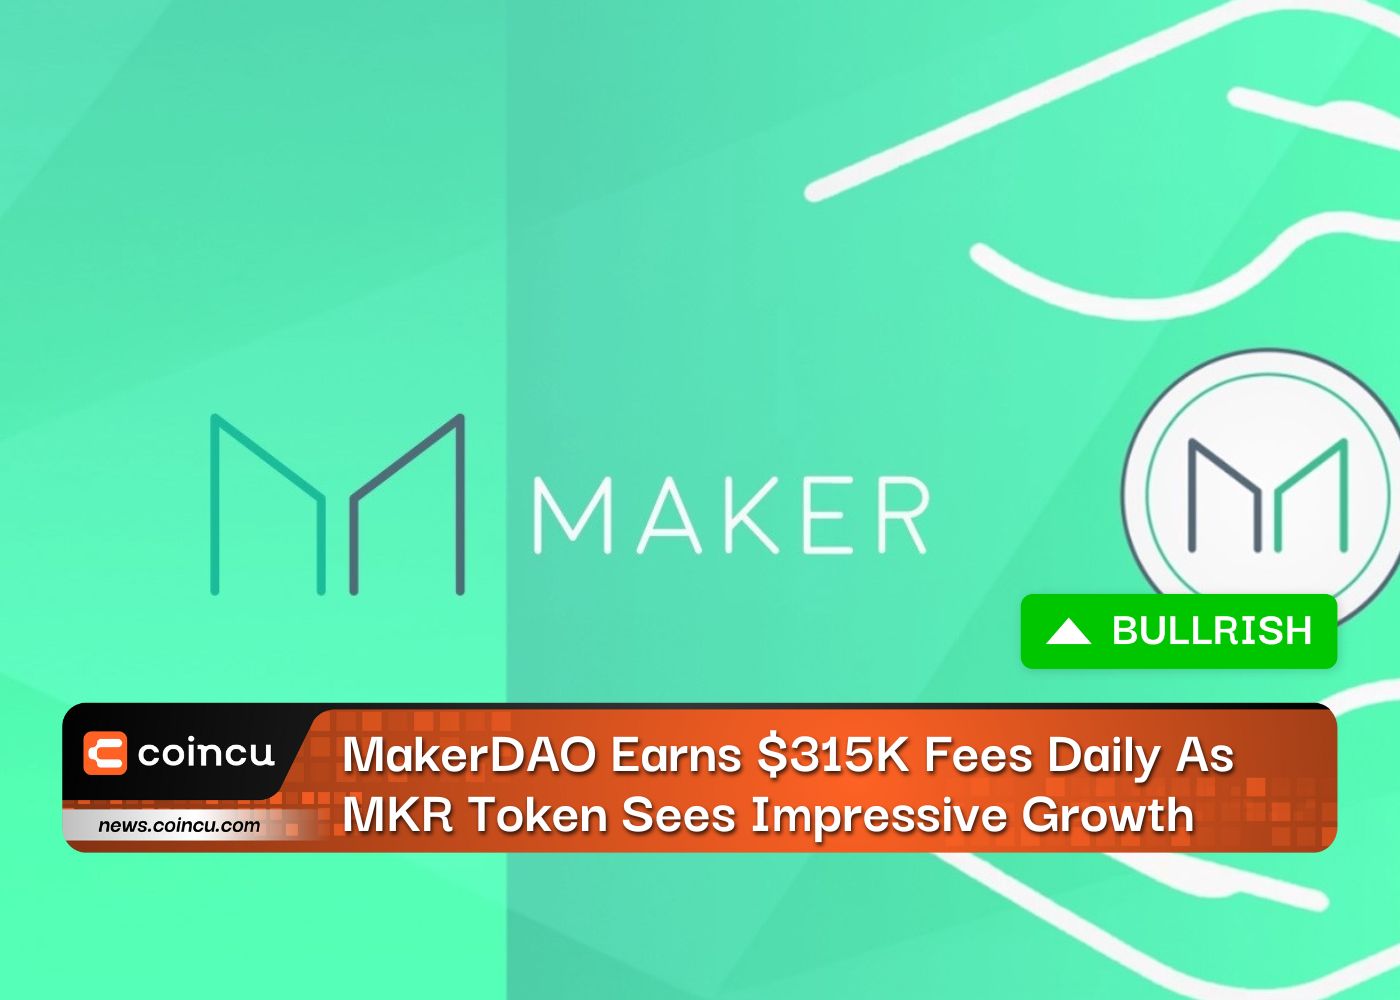 MakerDAO Earns $315K Fees Daily As MKR Token Sees Impressive Growth